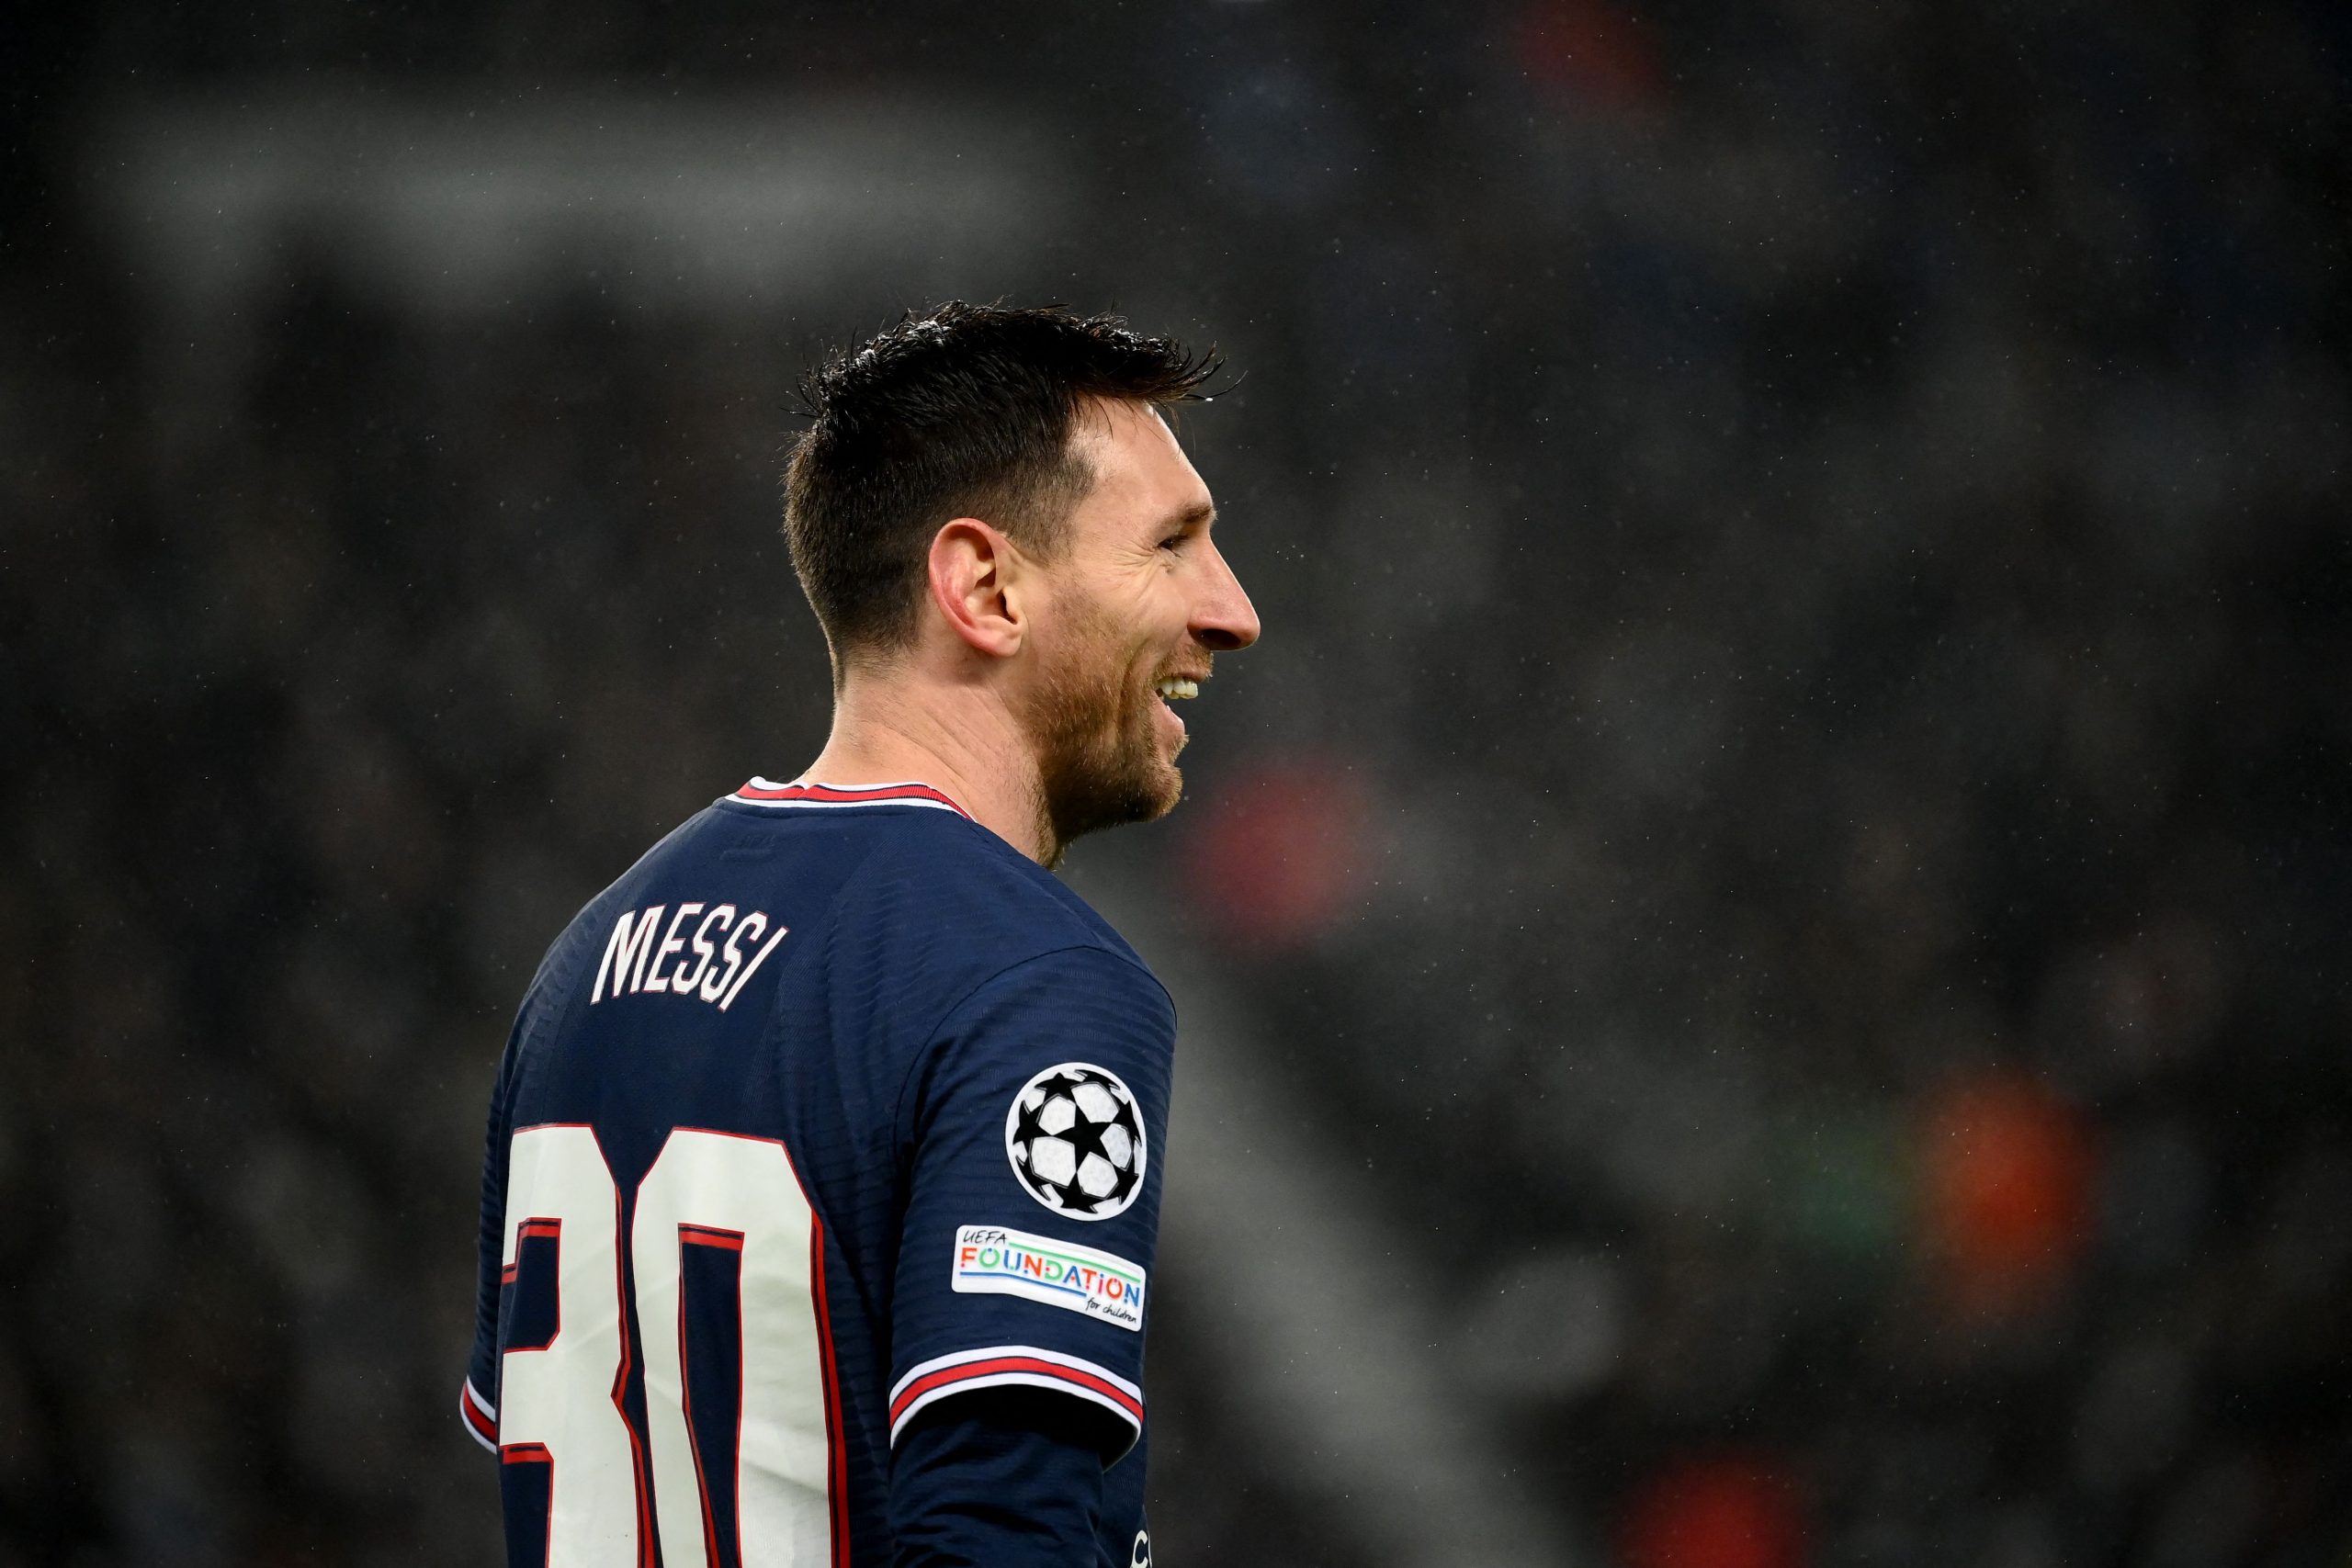 Lionel Messi's PSG Shirt Sold Out Online Only 30 Minutes After